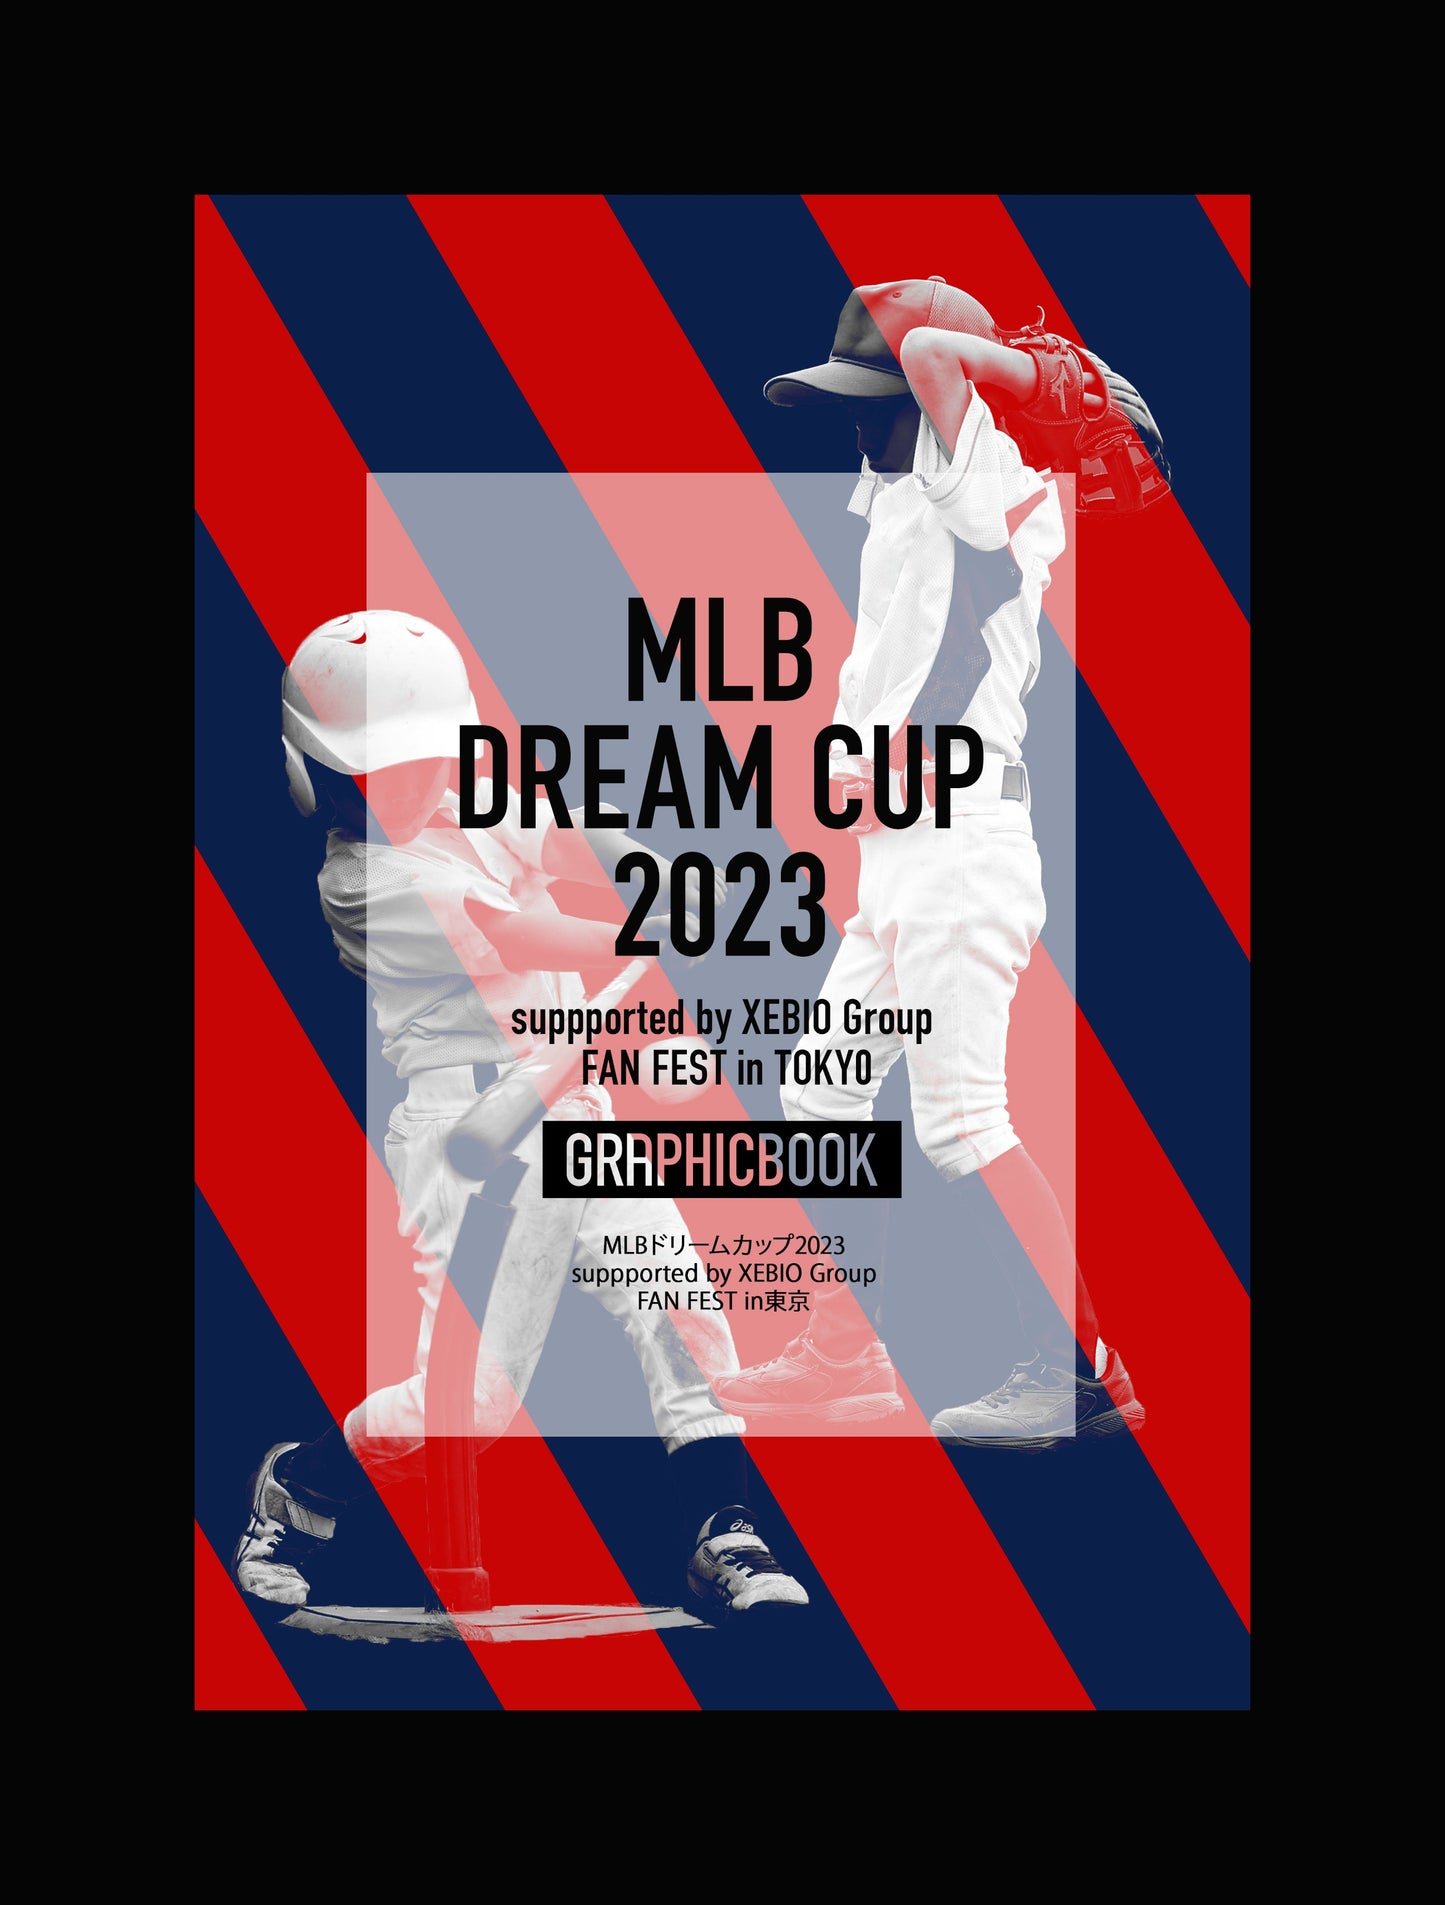 MLBドリームカップ2023 suppported by XEBIO Group FAN FEST　in東京（E1377002）